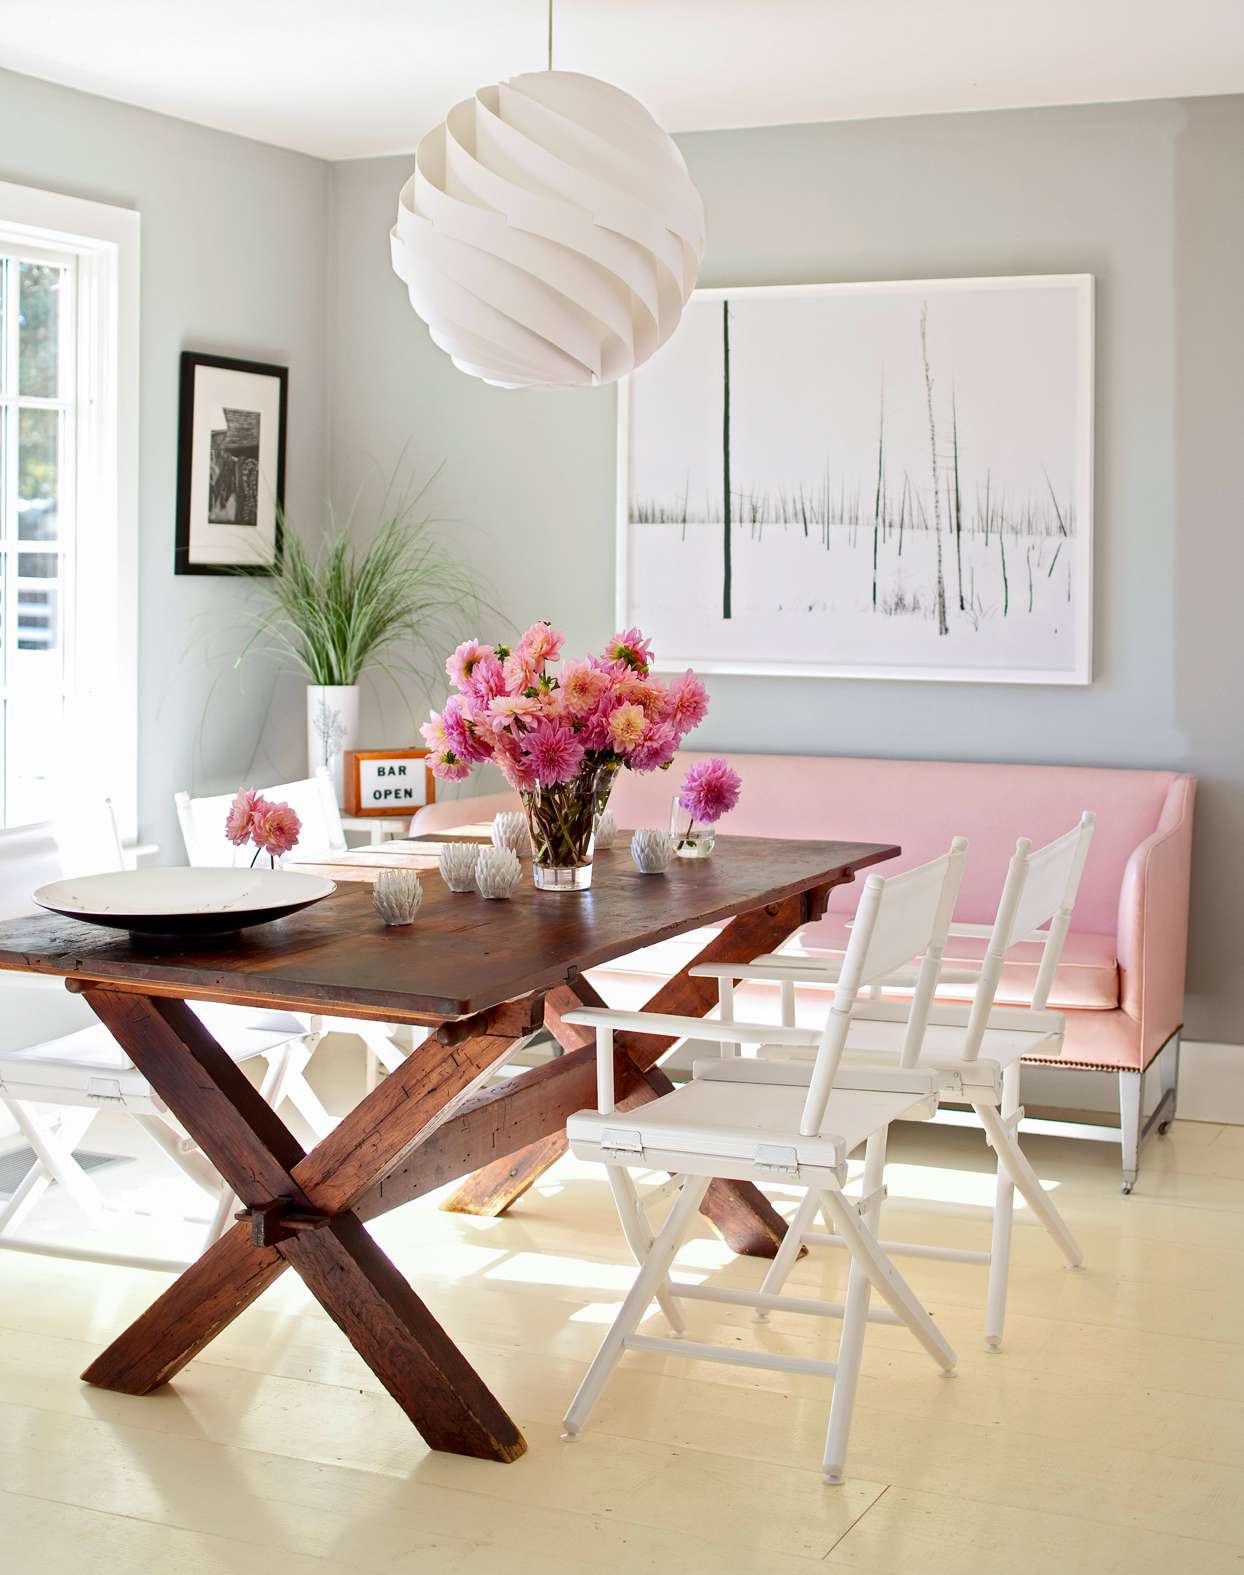 How To Choose Colors That Beautifully Pair With Wood Furniture And Floors Better Homes Gardens